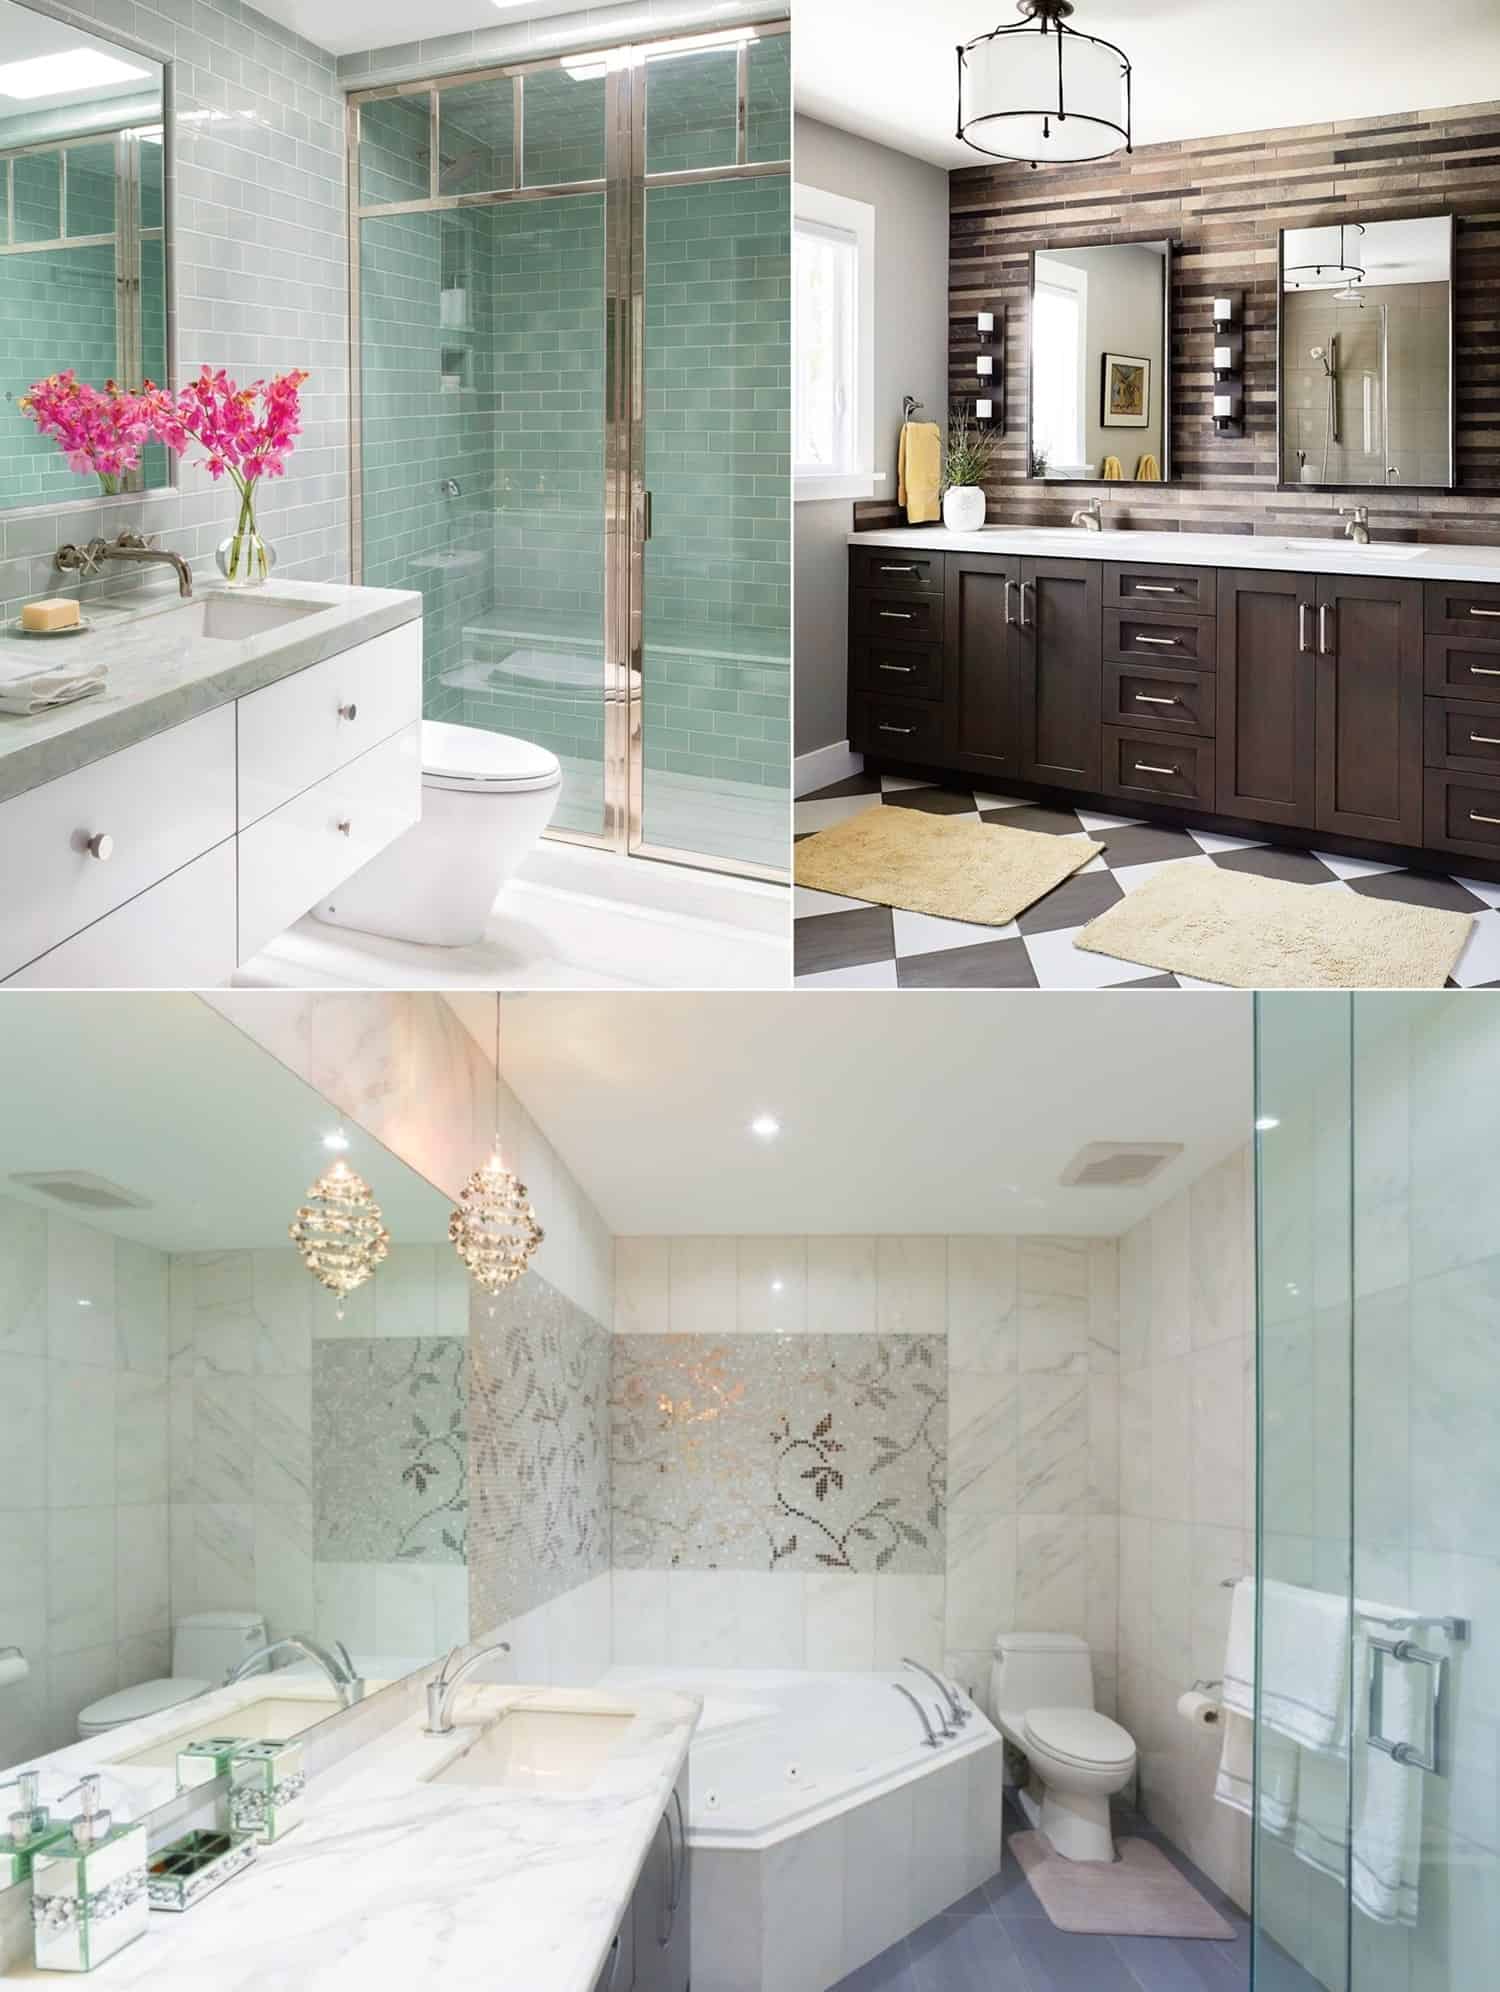 CHOOSE THE RIGHT TYPE OF TILES